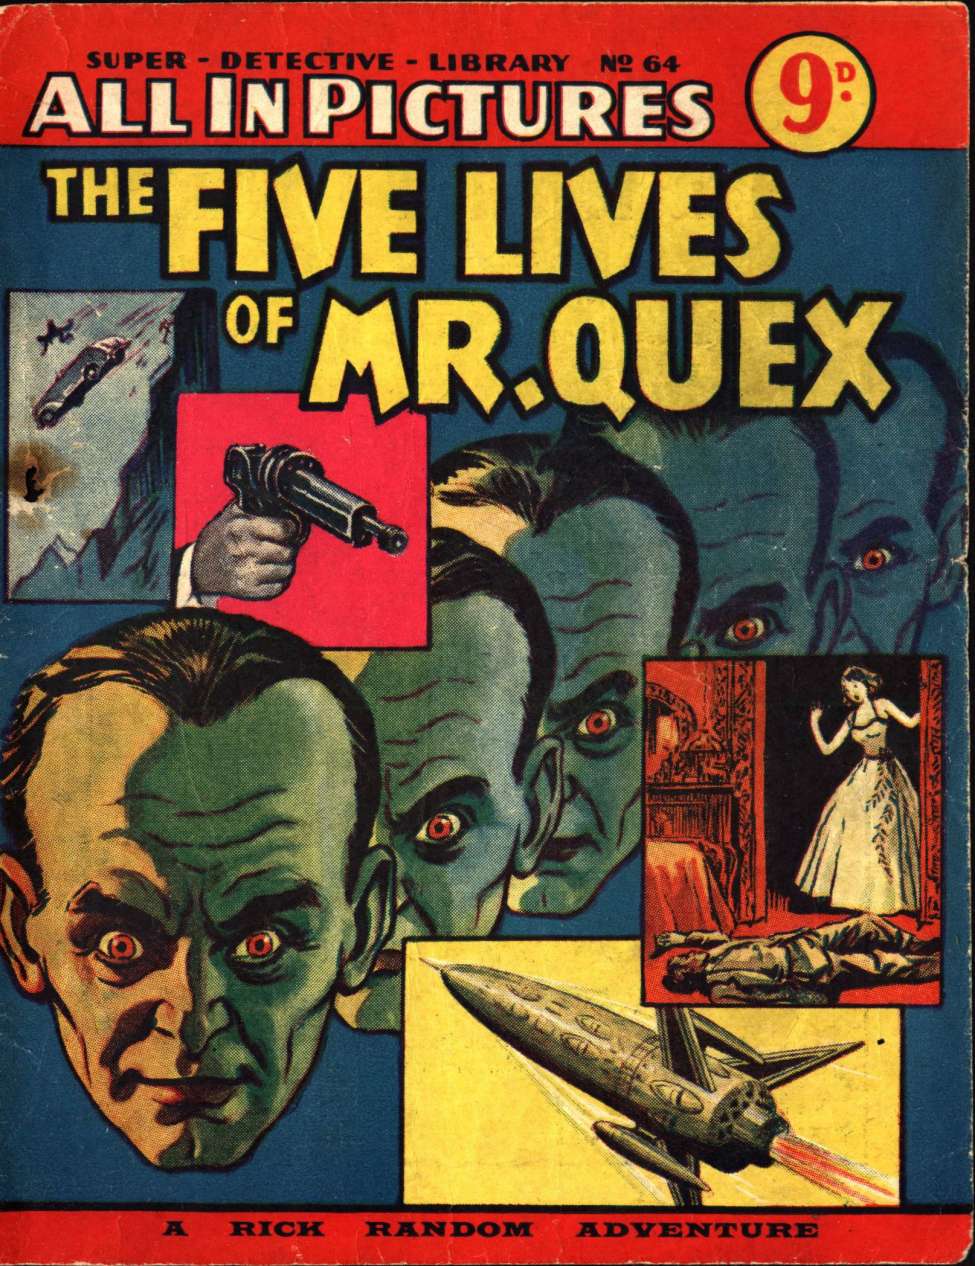 Book Cover For Super Detective Library 64 - The Five Lives of Mr. Quex